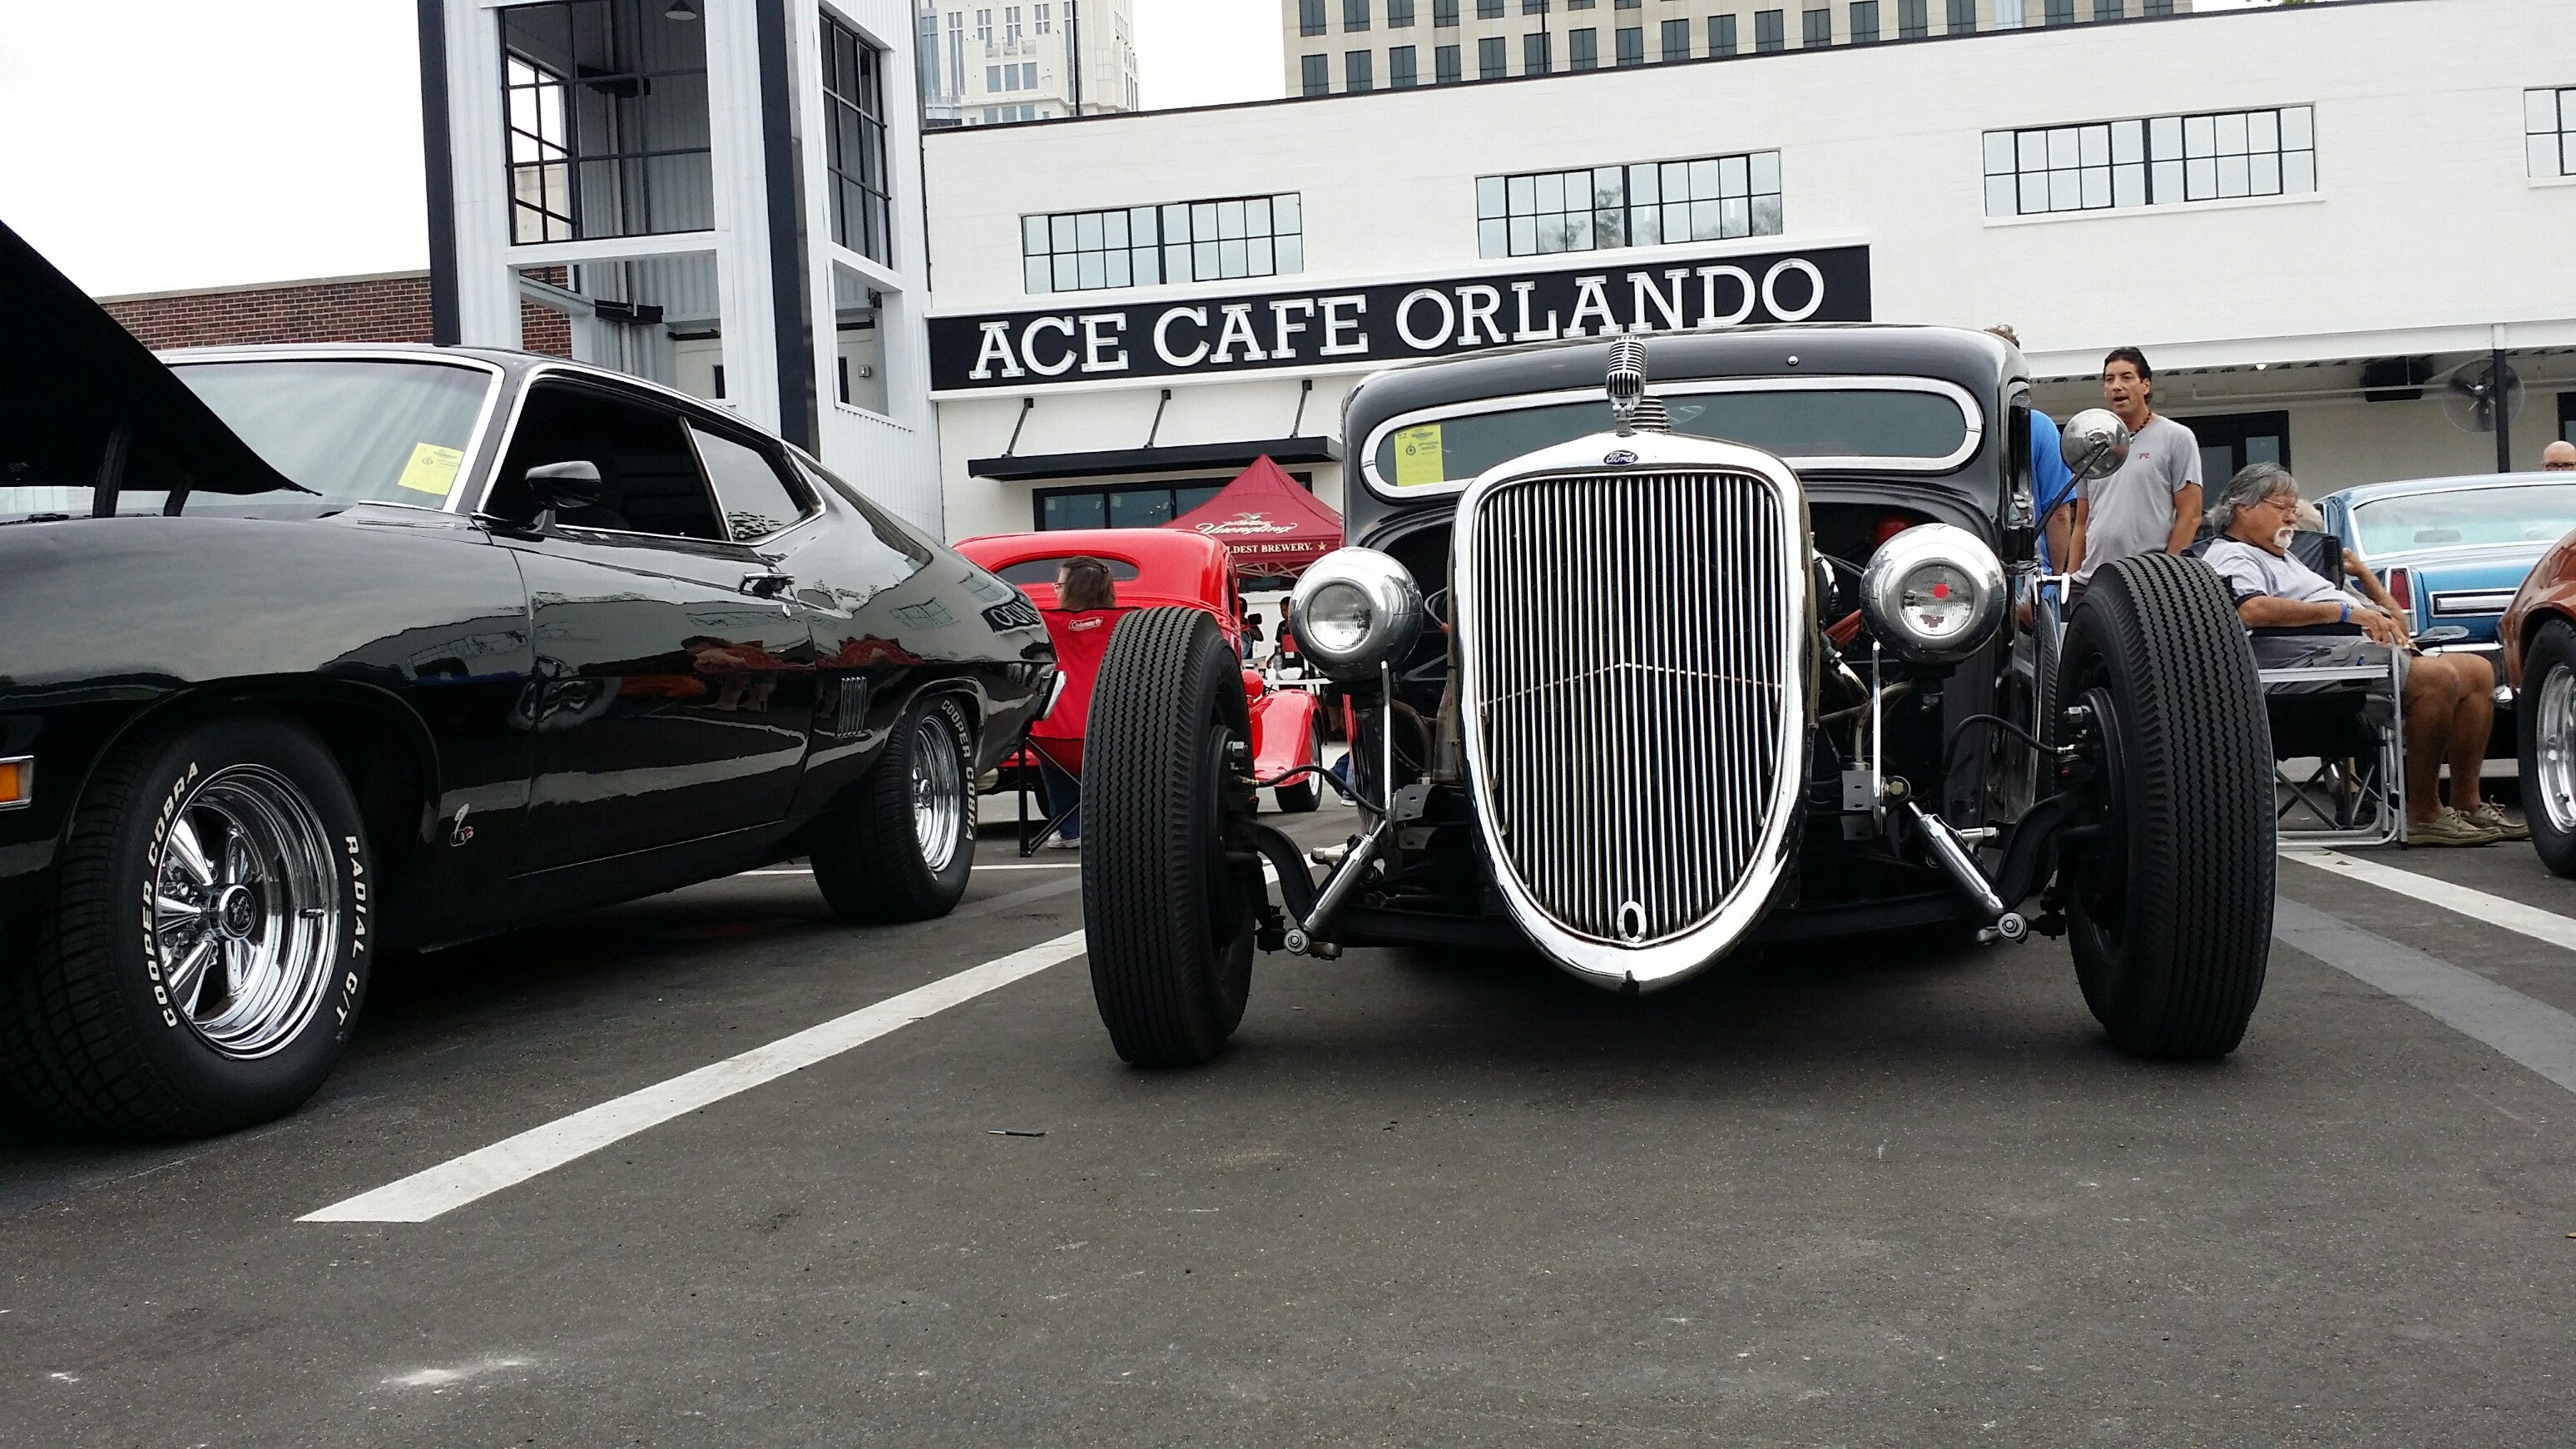 Recap: A Taste from the ACE Cafe USA Pre-opening Car Show